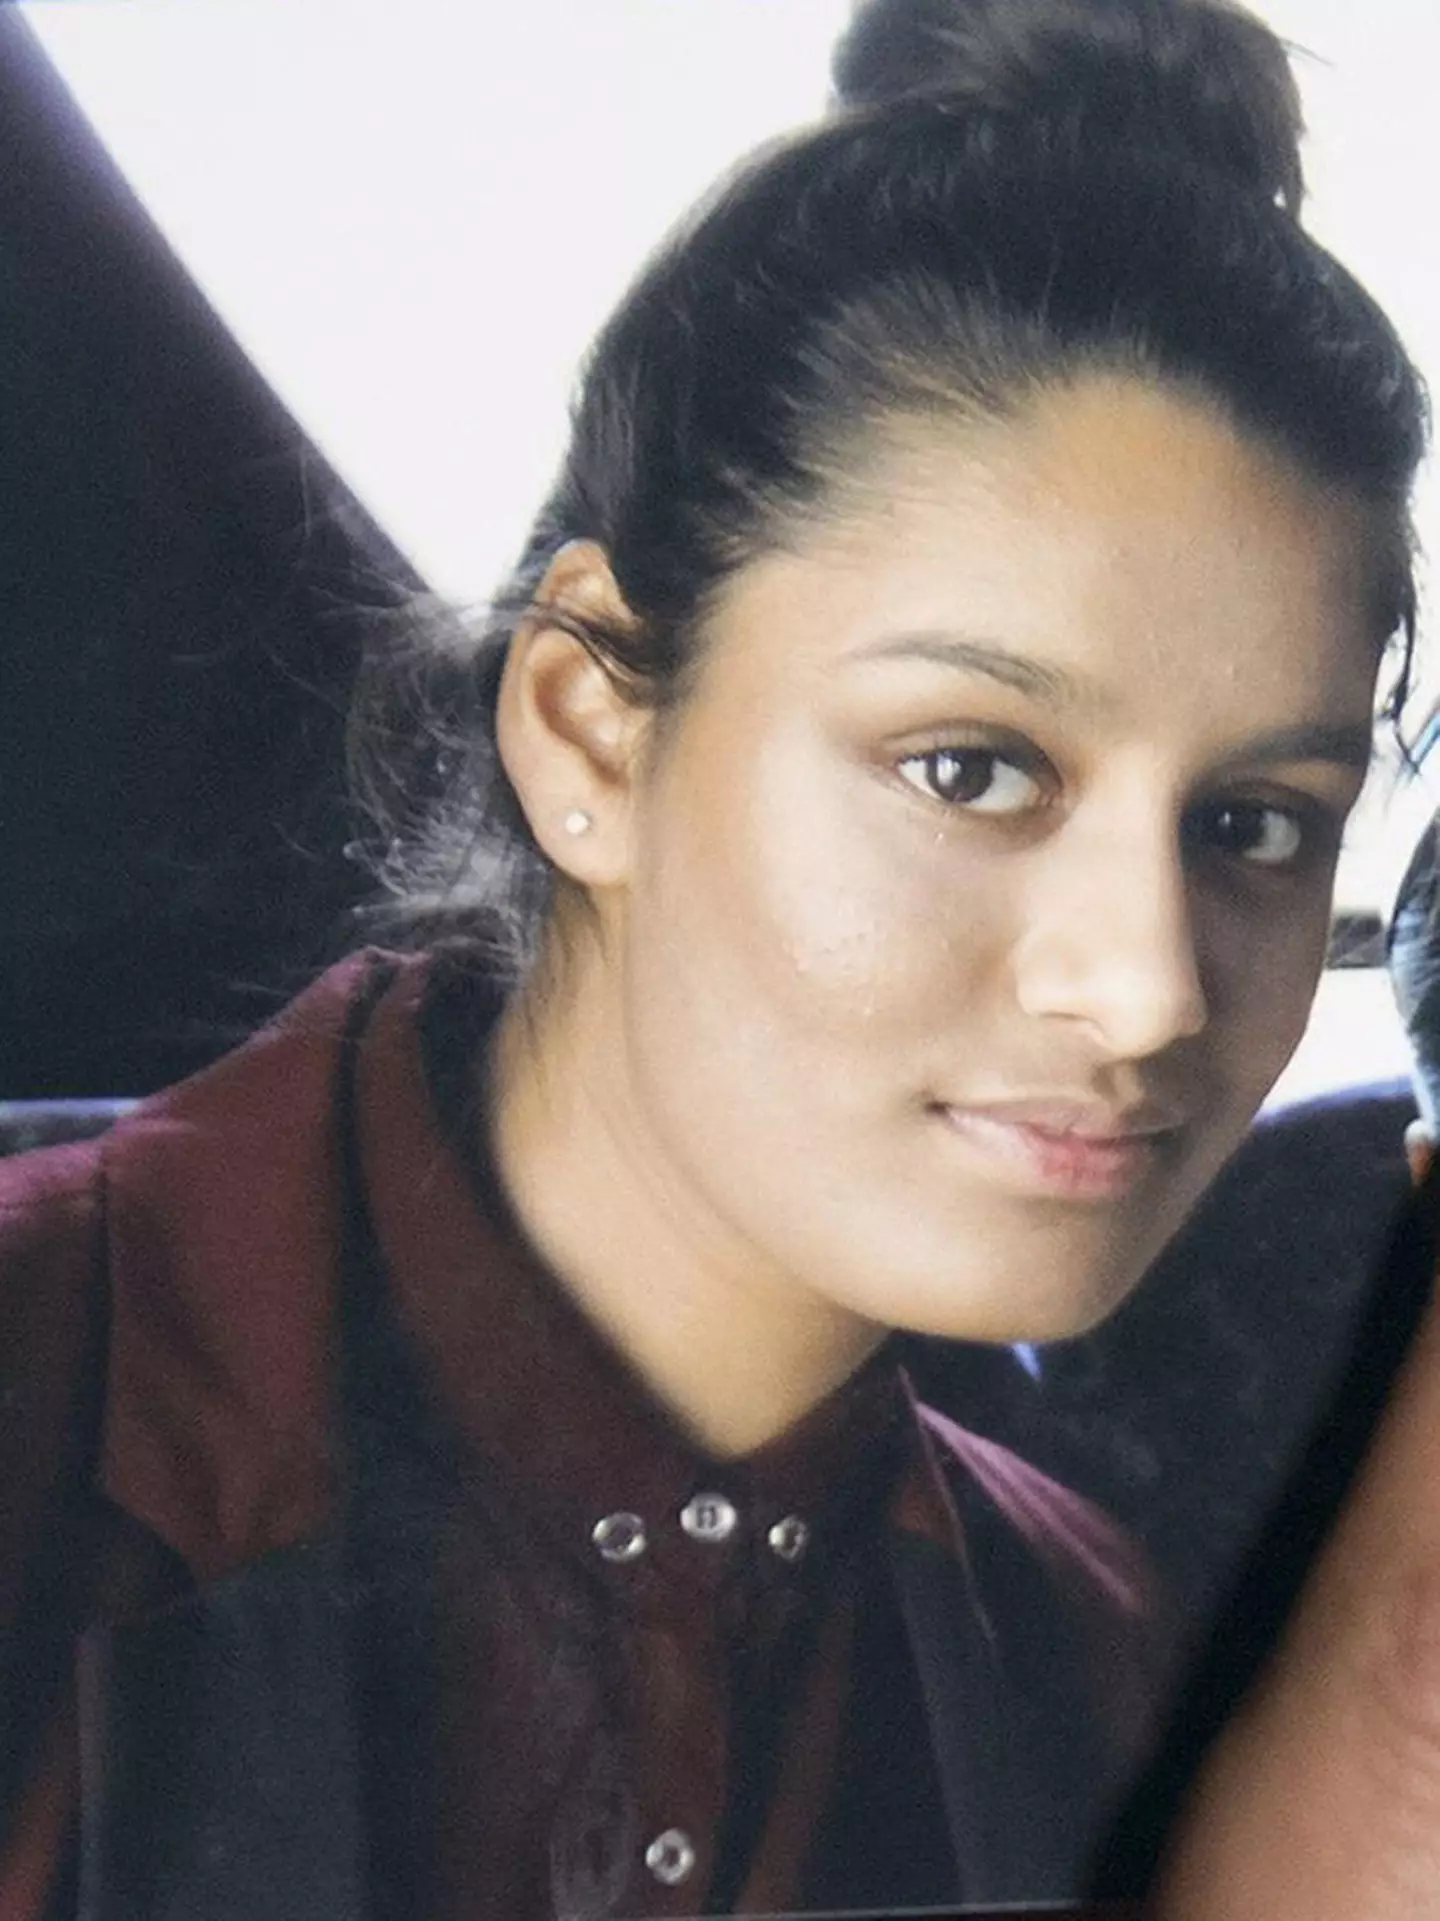 Shamima Begum joined ISIS when she was 15.